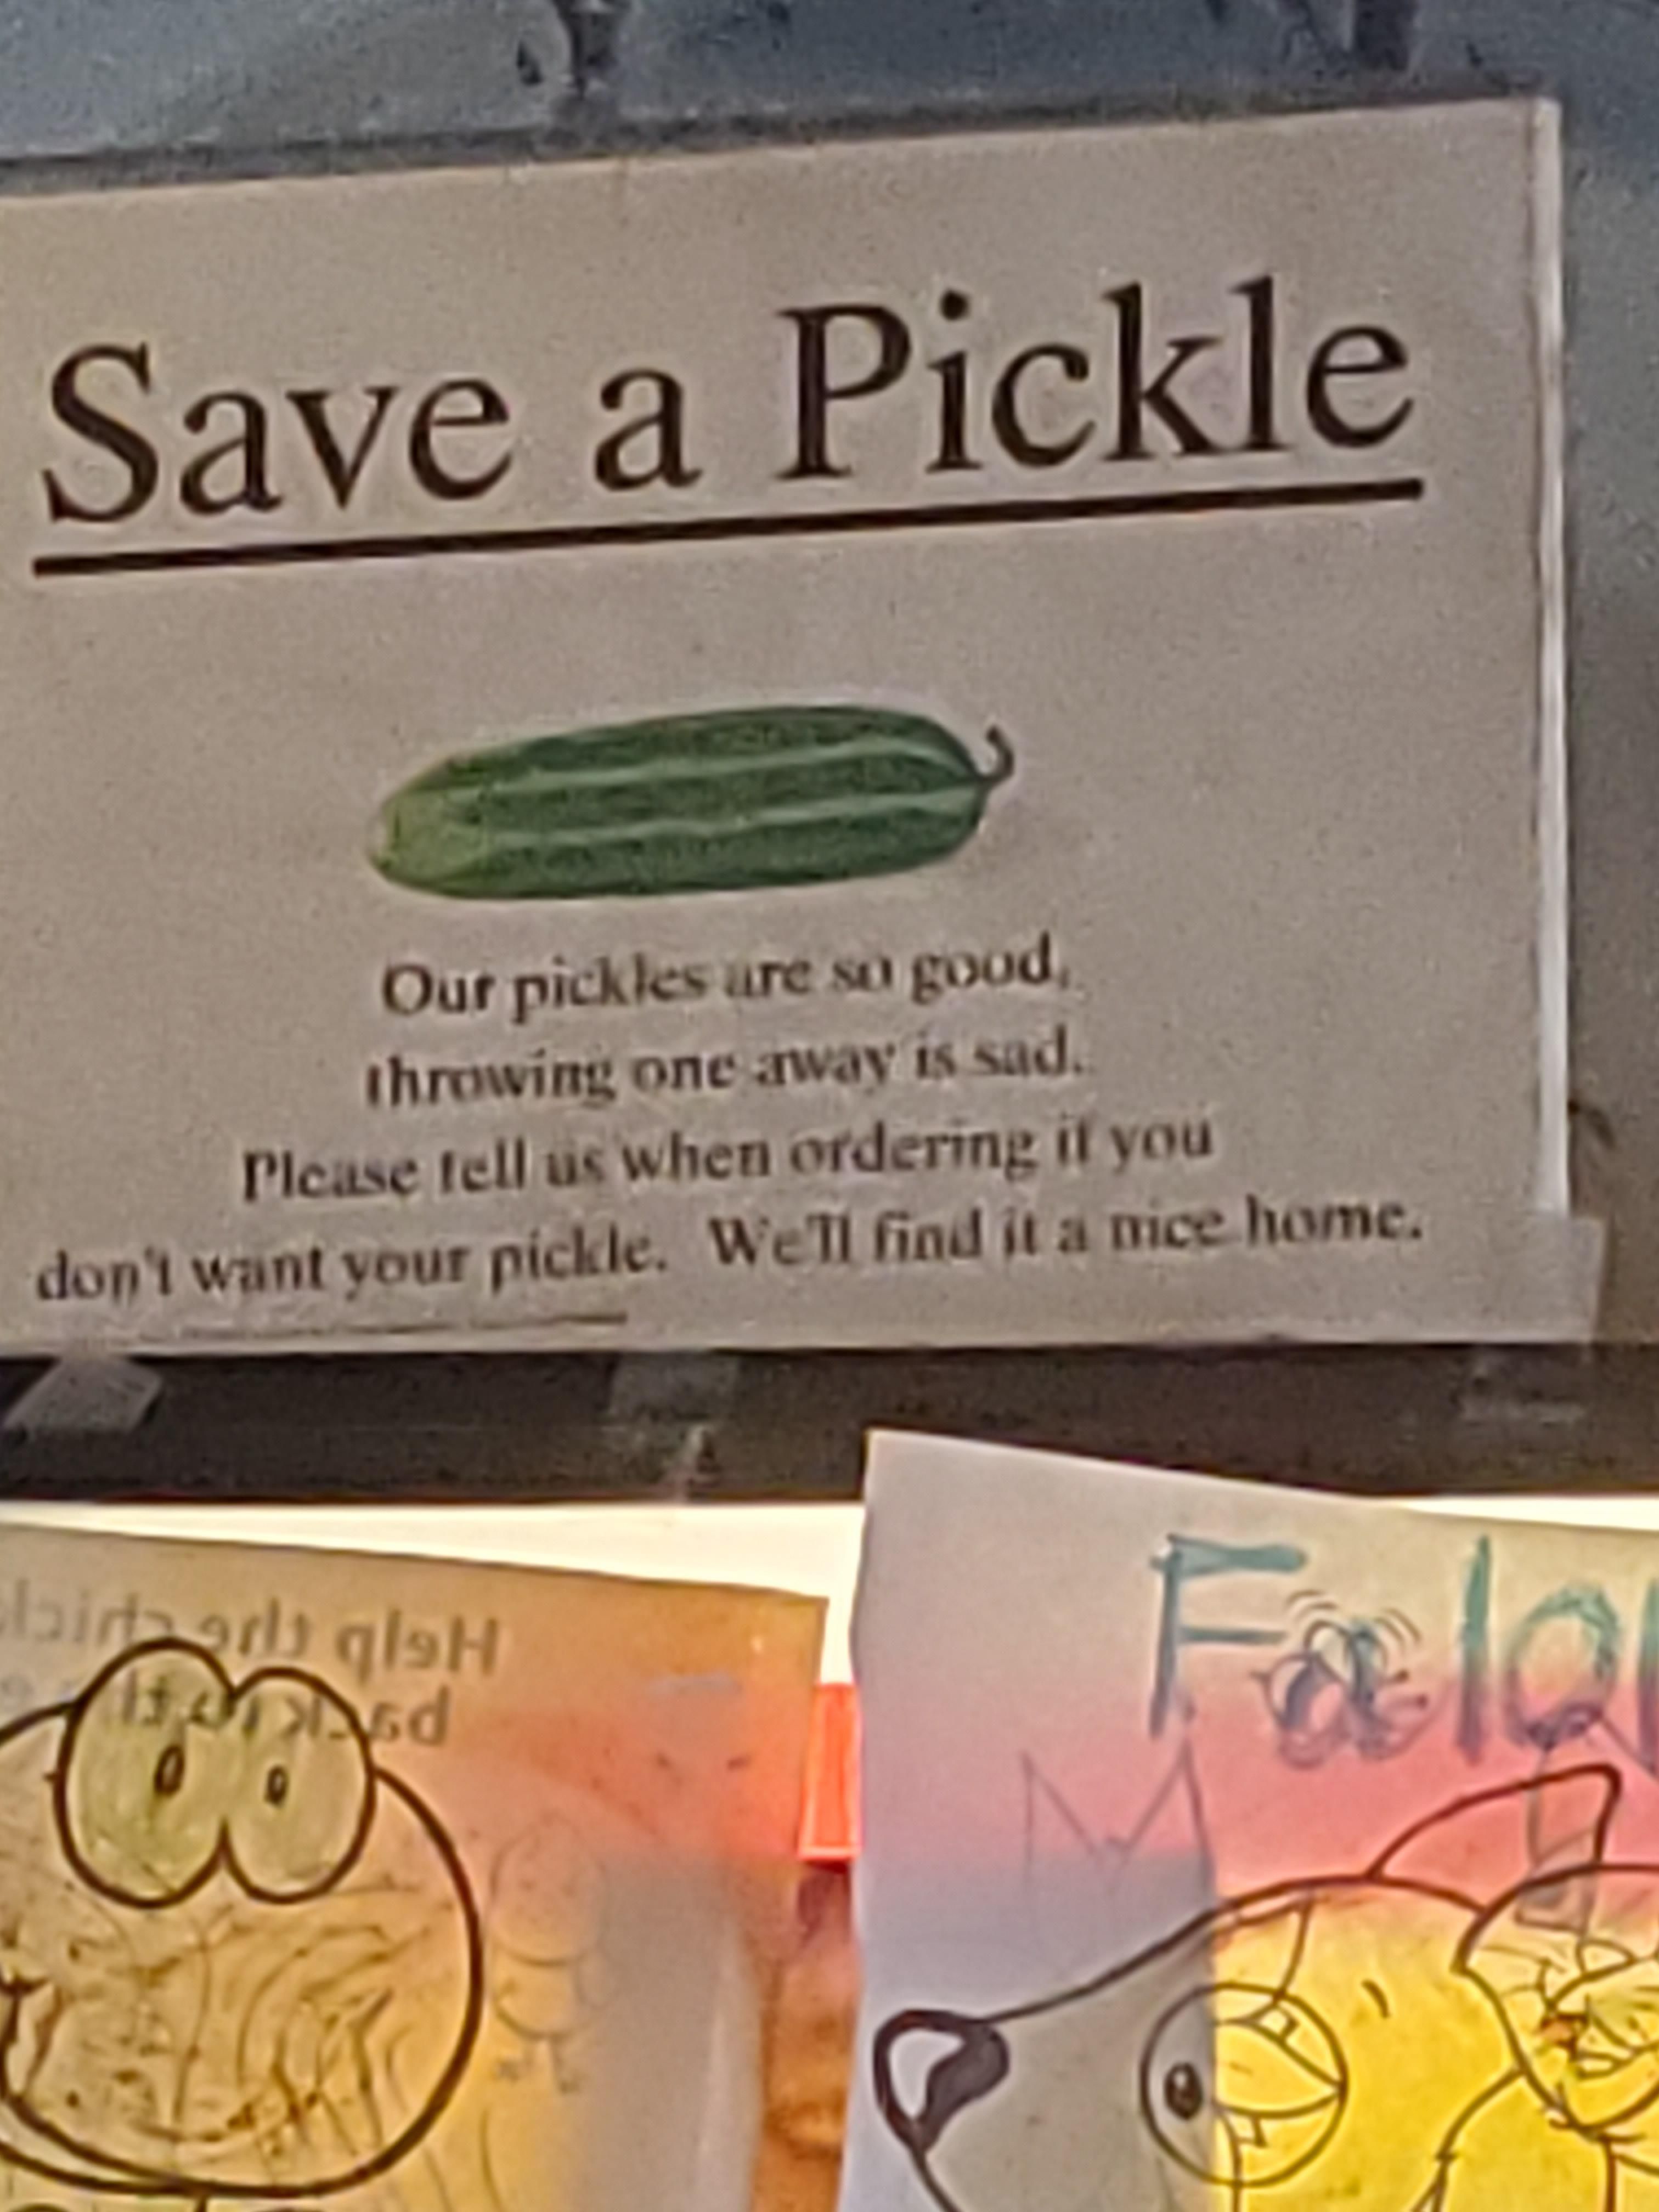 A sign at a local resturaunt in my town.